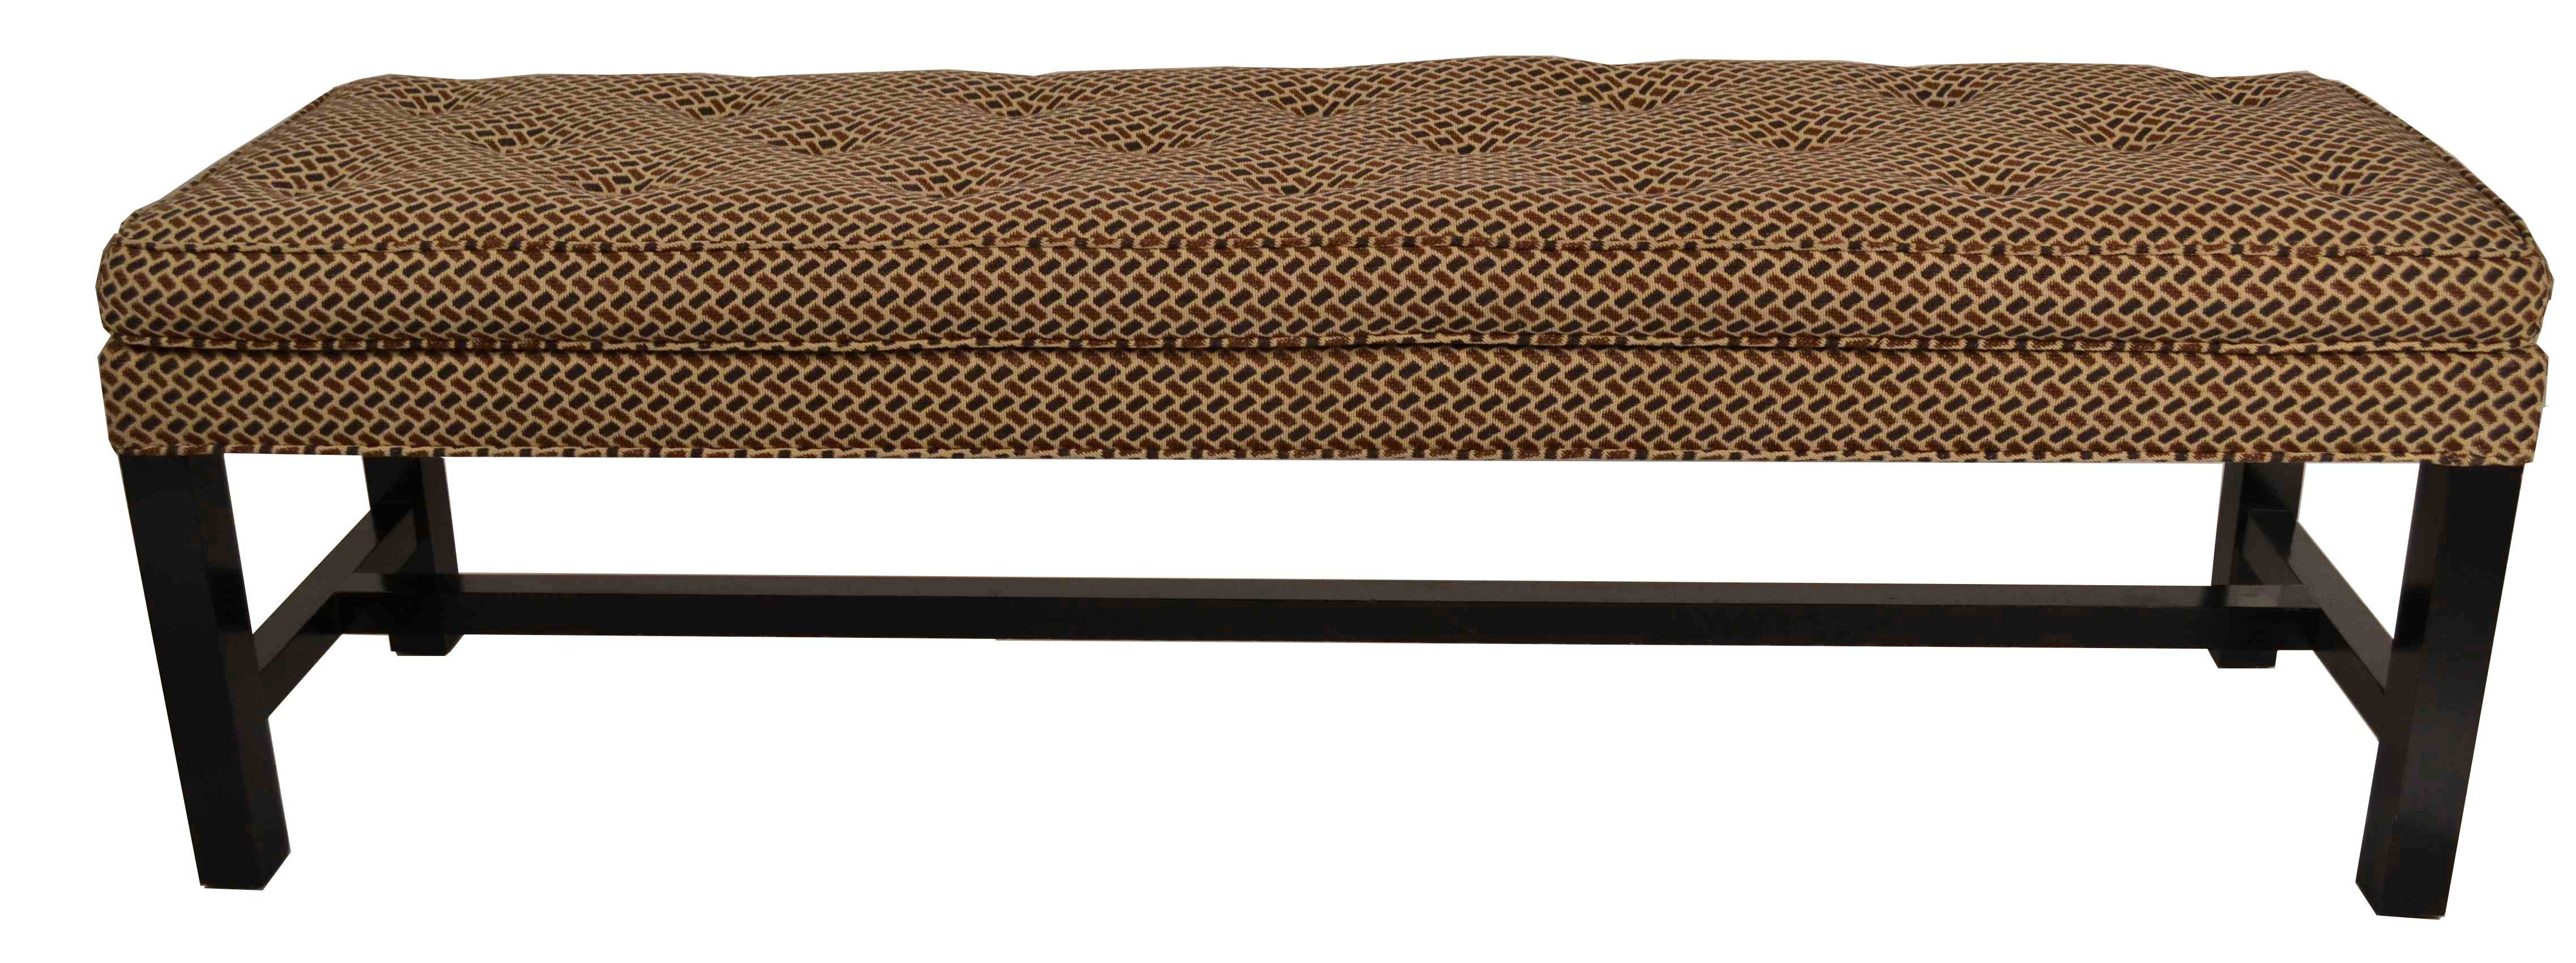 Long Upholstered Bench Tufted Top Wood Legs